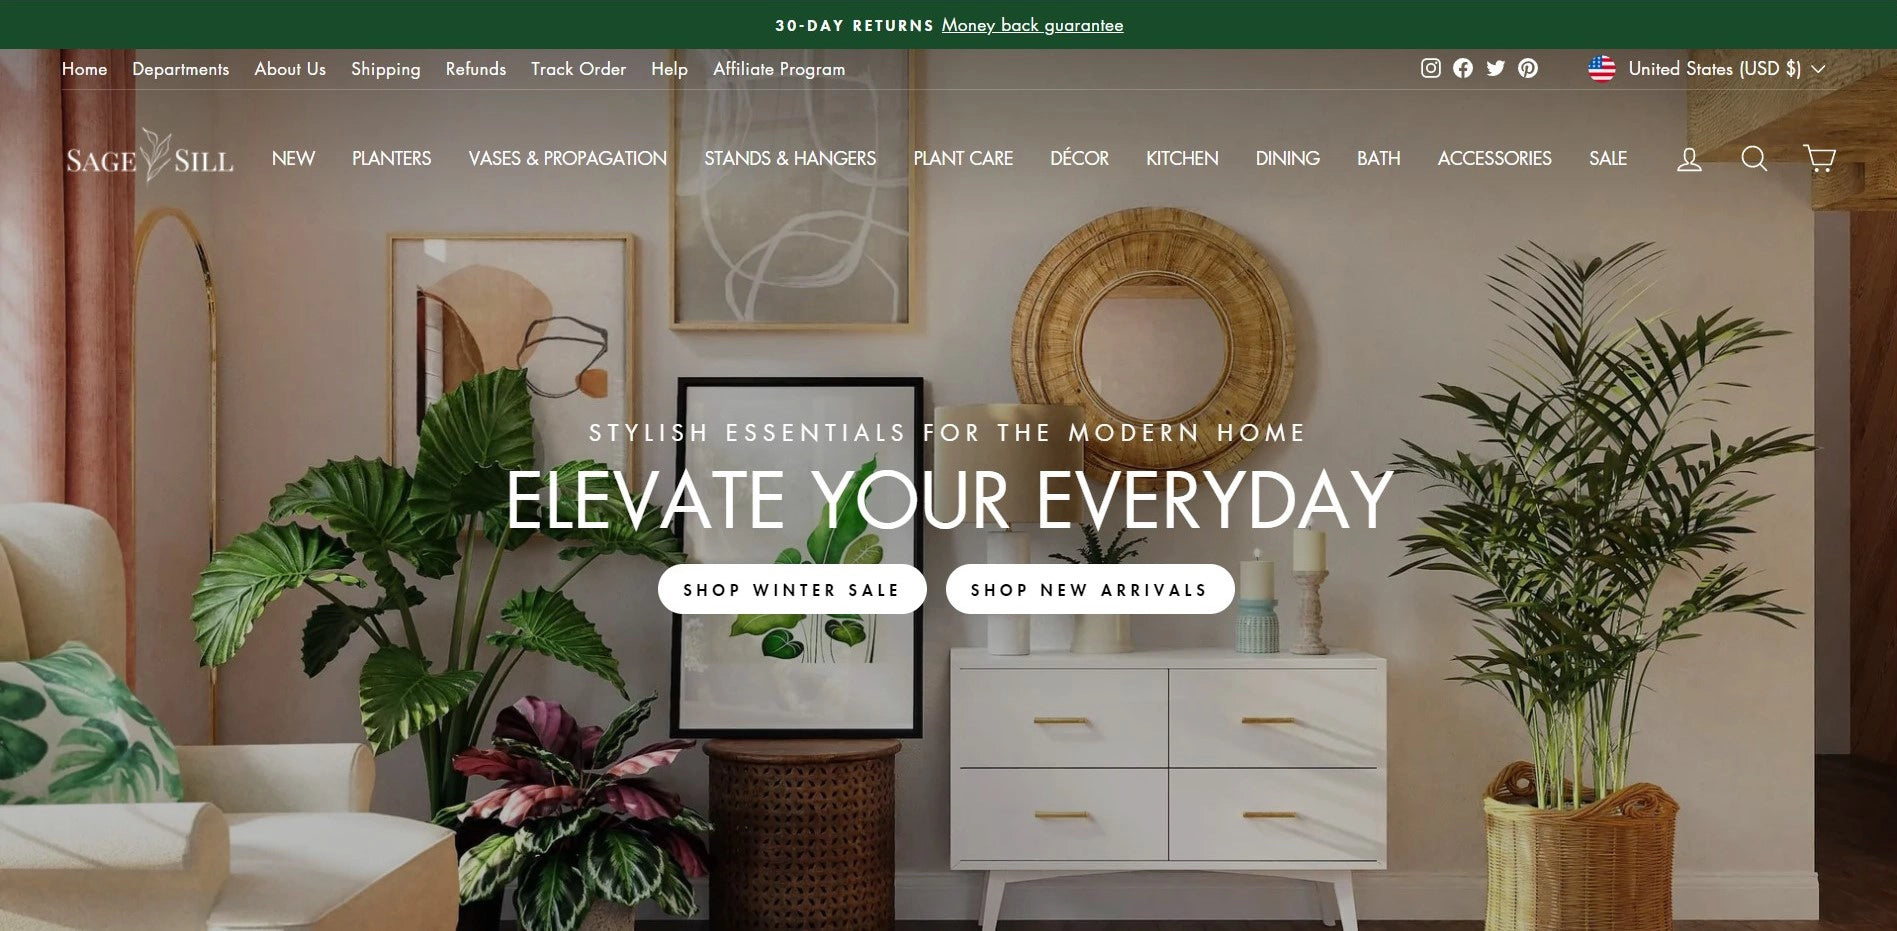 Sage & Sill’s homepage